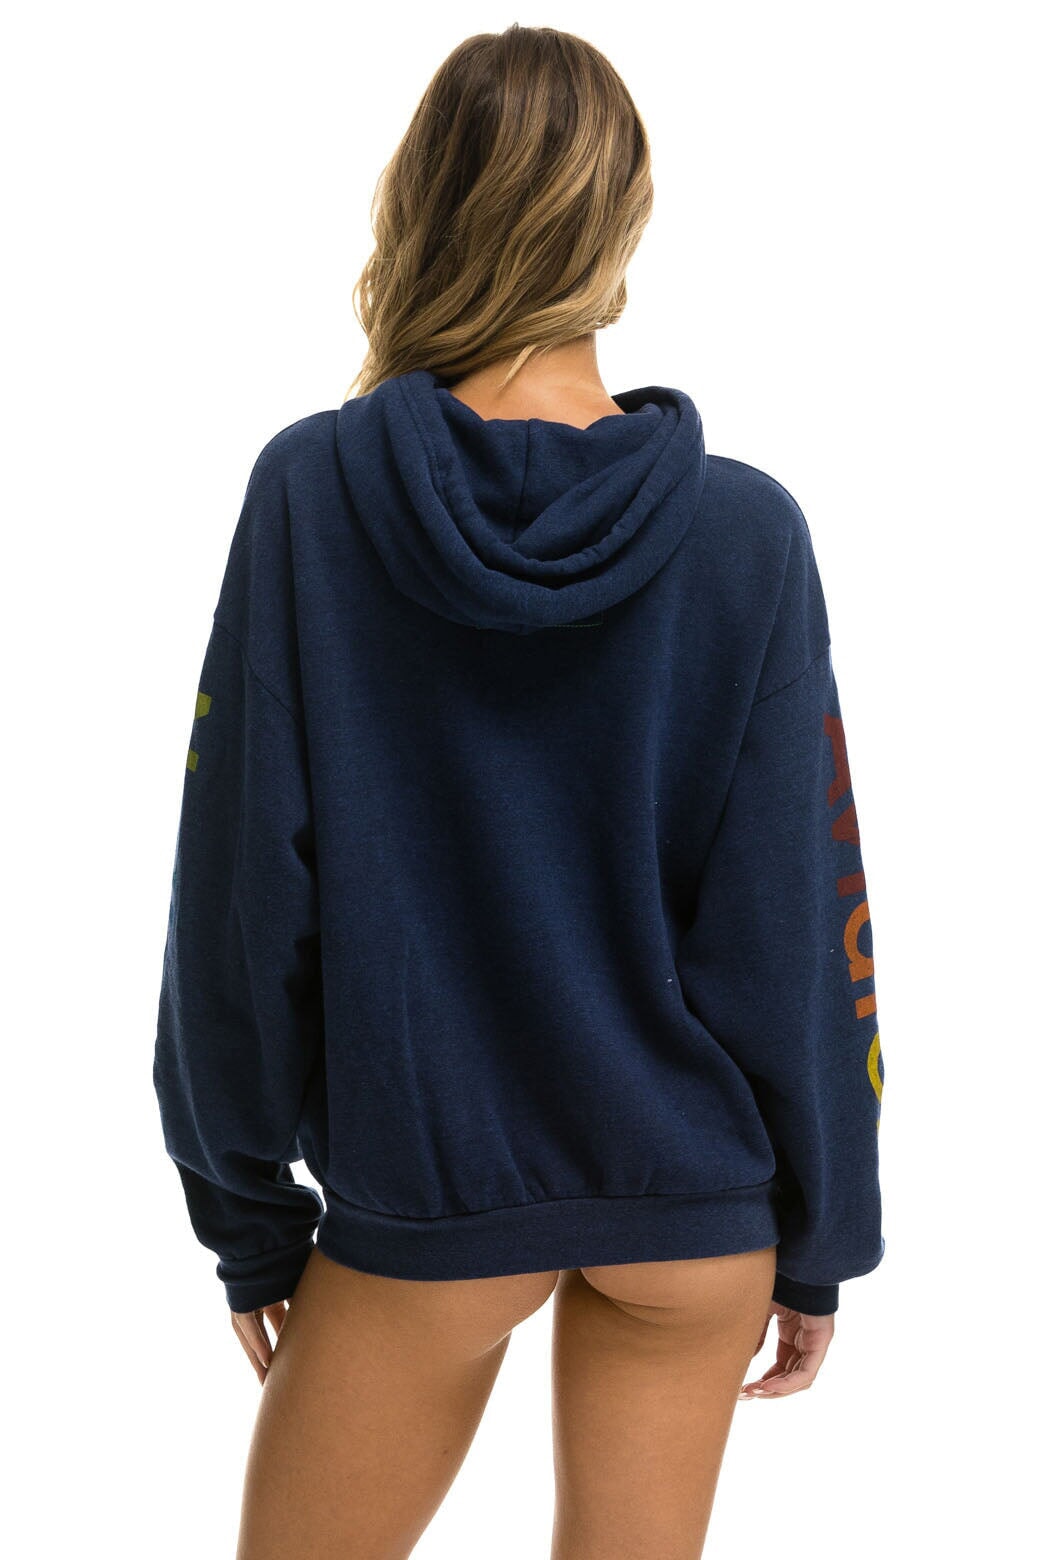 AVIATOR NATION ASPEN RELAXED PULLOVER HOODIE - NAVY Hoodie Aviator Nation 